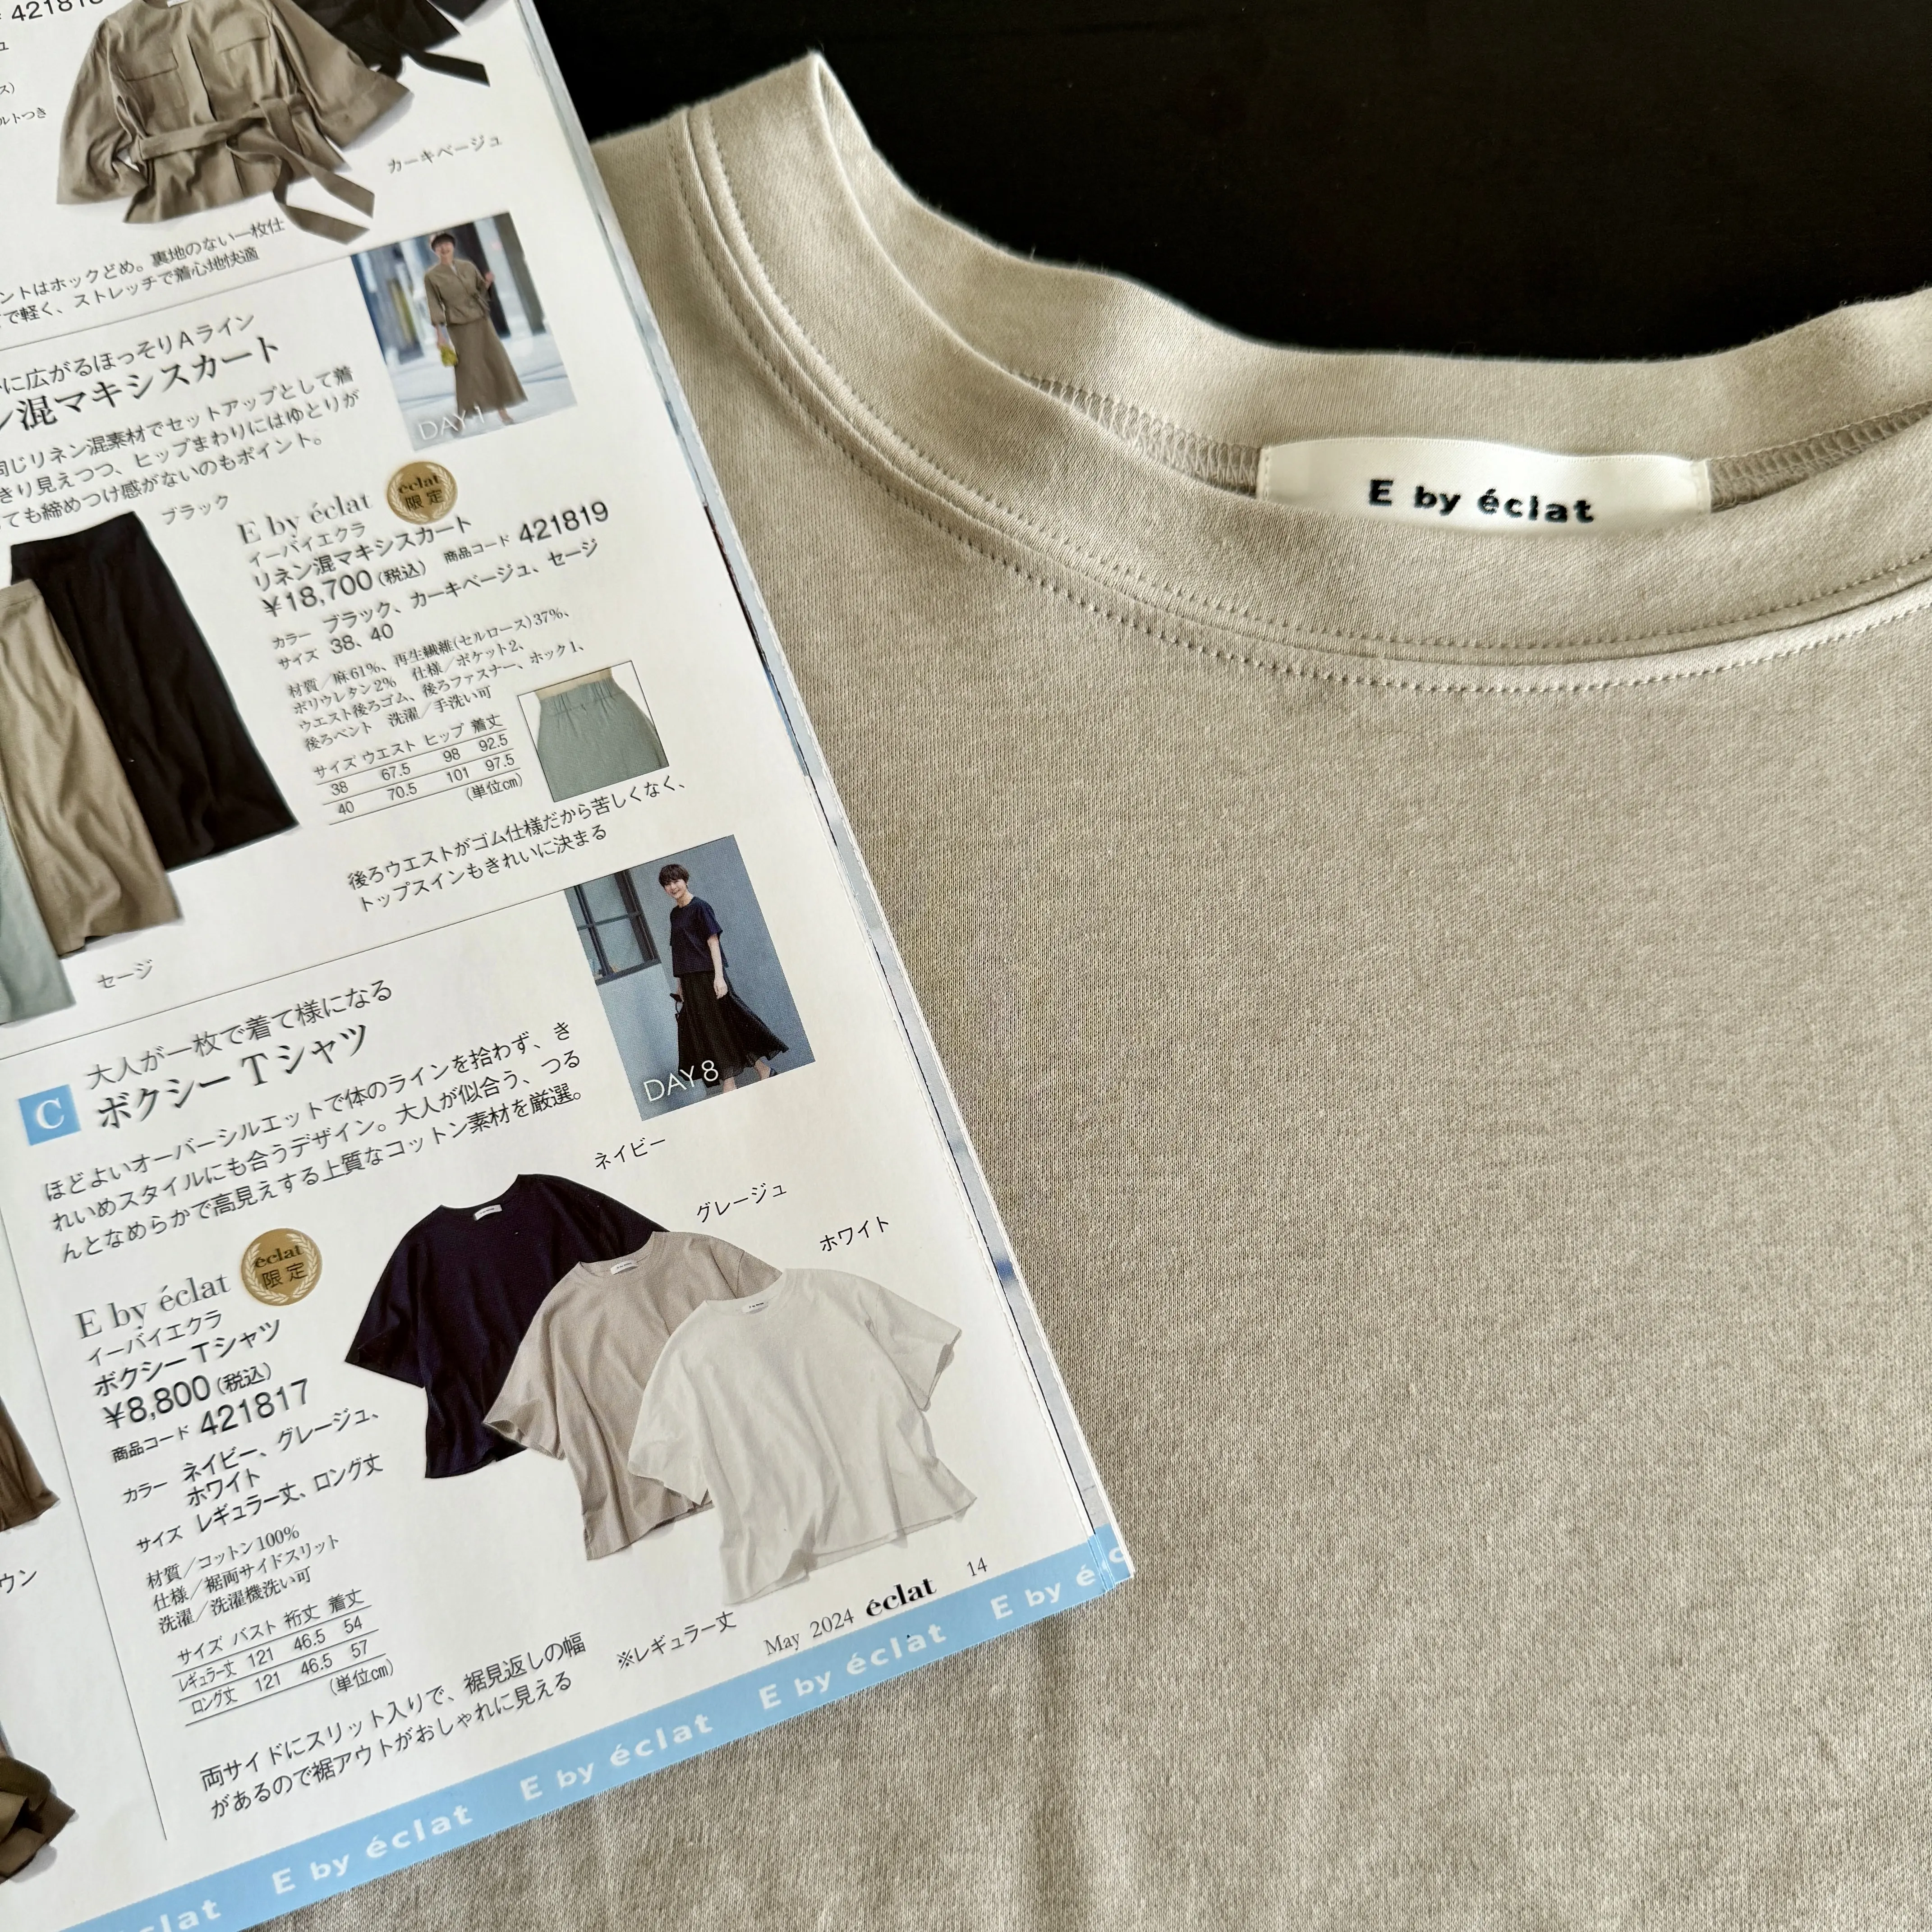 E by éclat　ボクシーTシャツの４コーデ_1_1-2